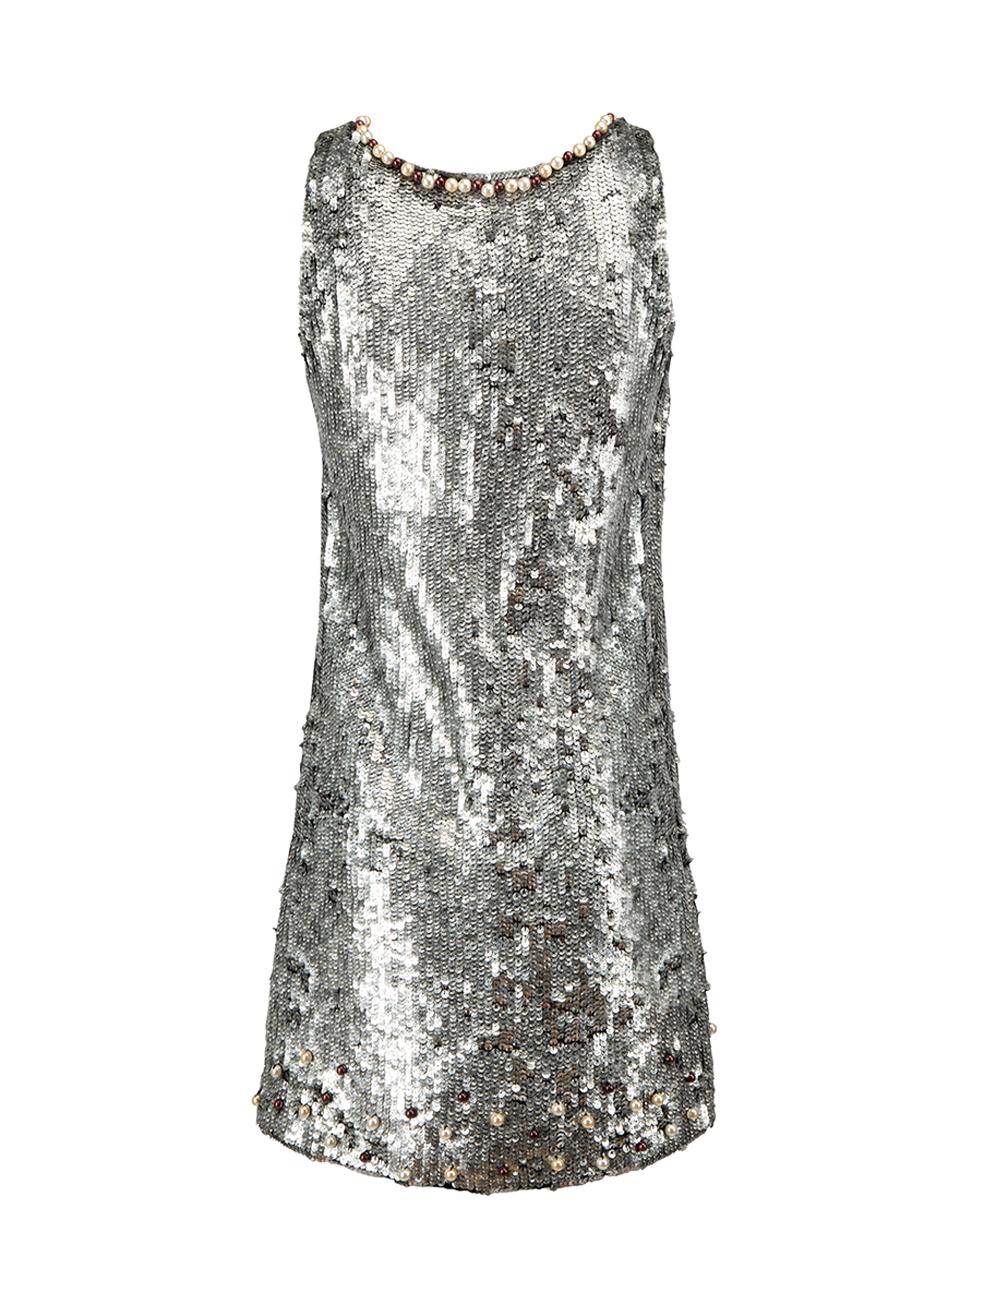 Valentino Garavani RED Valentino Silver Sequin & Beaded Sleeveless Dress Size S In Good Condition For Sale In London, GB